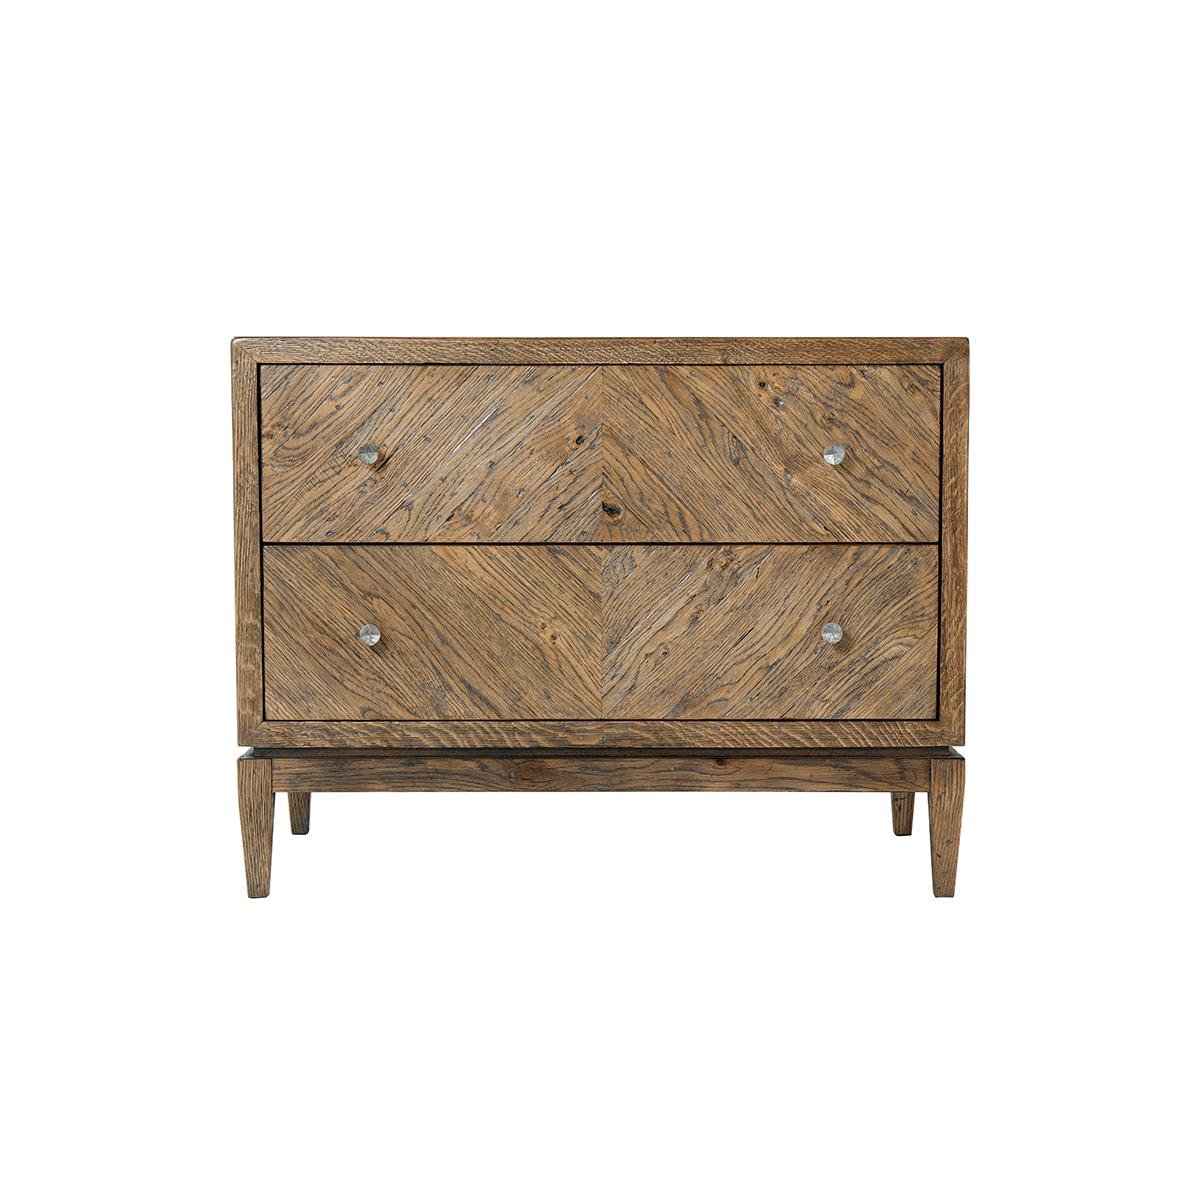 Rustic Oak two drawer nightstand with a light oak rustic finish, herringbone diamond parquetry design, two long drawers with vintage textured metal handles and raised on square tapered legs.

Dimensions: 35